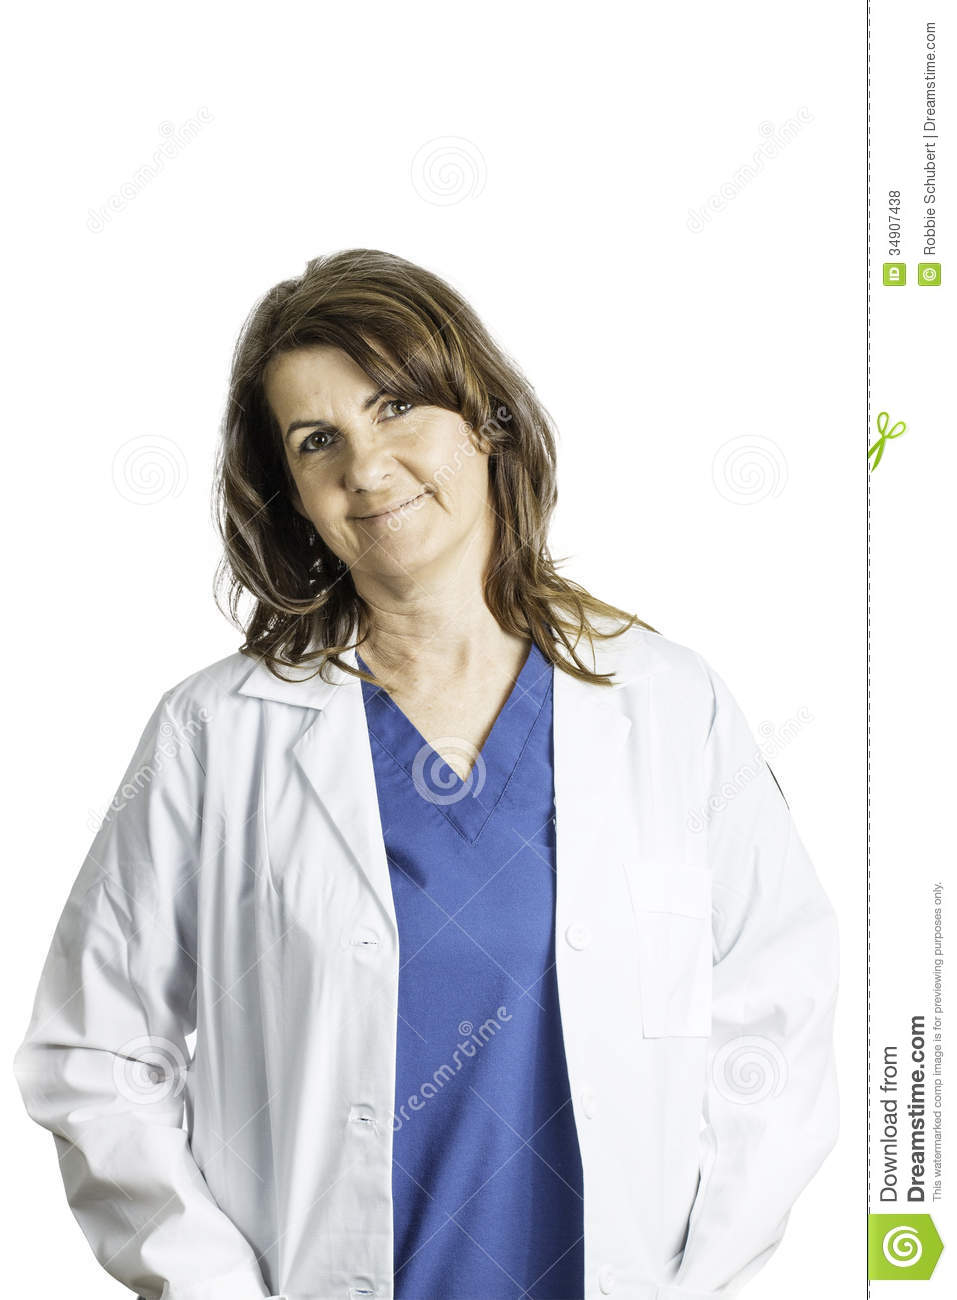 Female Doctor Wearing Blue Scrubs And A Lab Coat Isolated On A White